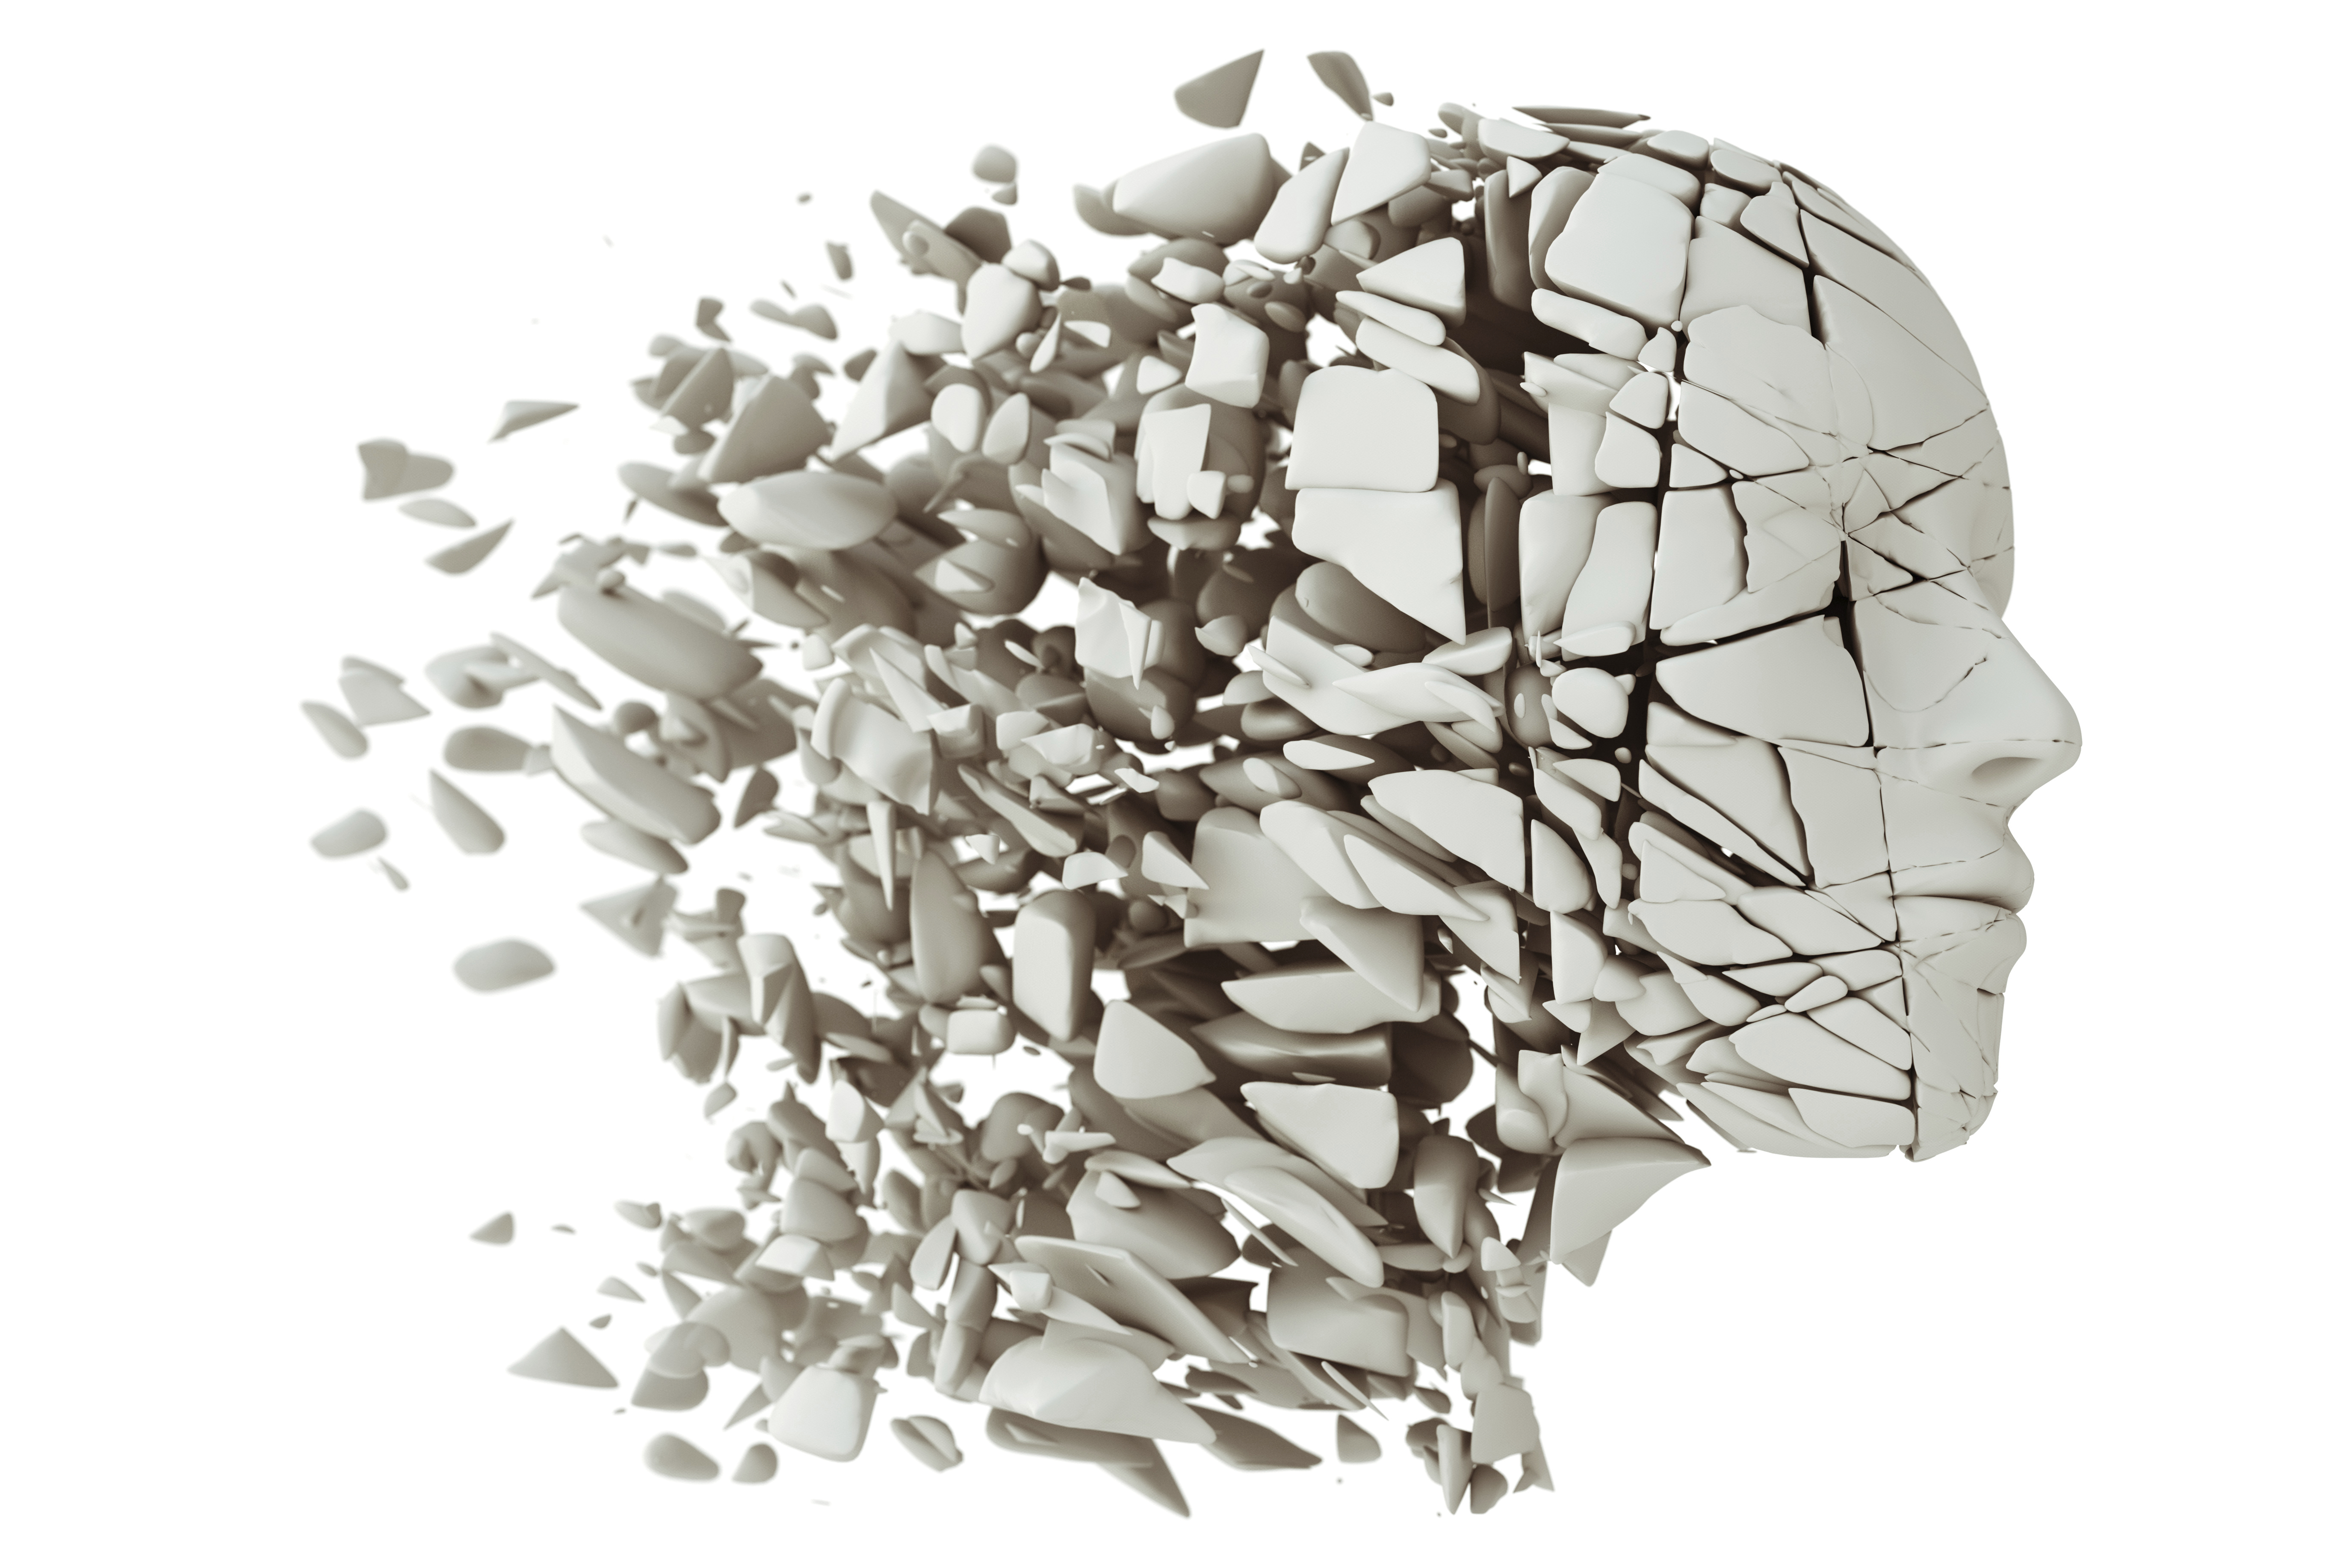 A fractured skull. (iStock Photo)